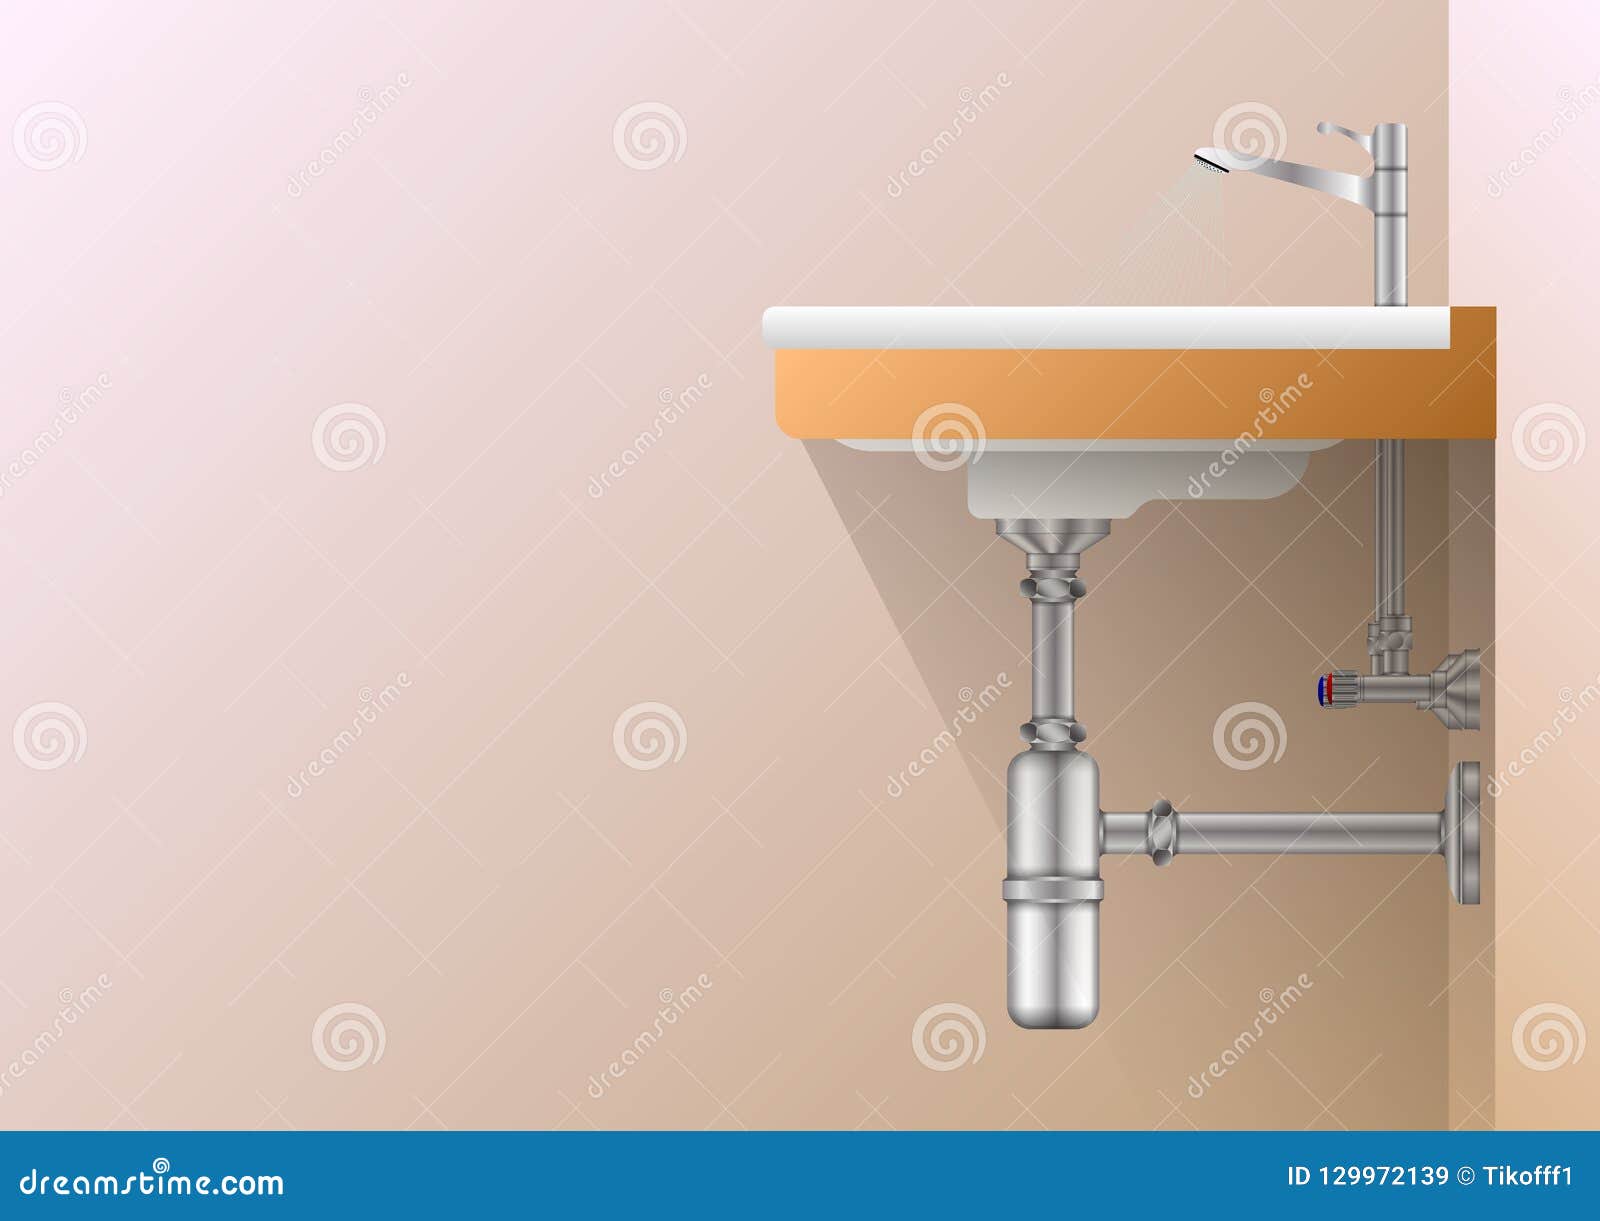 Realistic Siphon And Sink Stock Vector Illustration Of Pipe